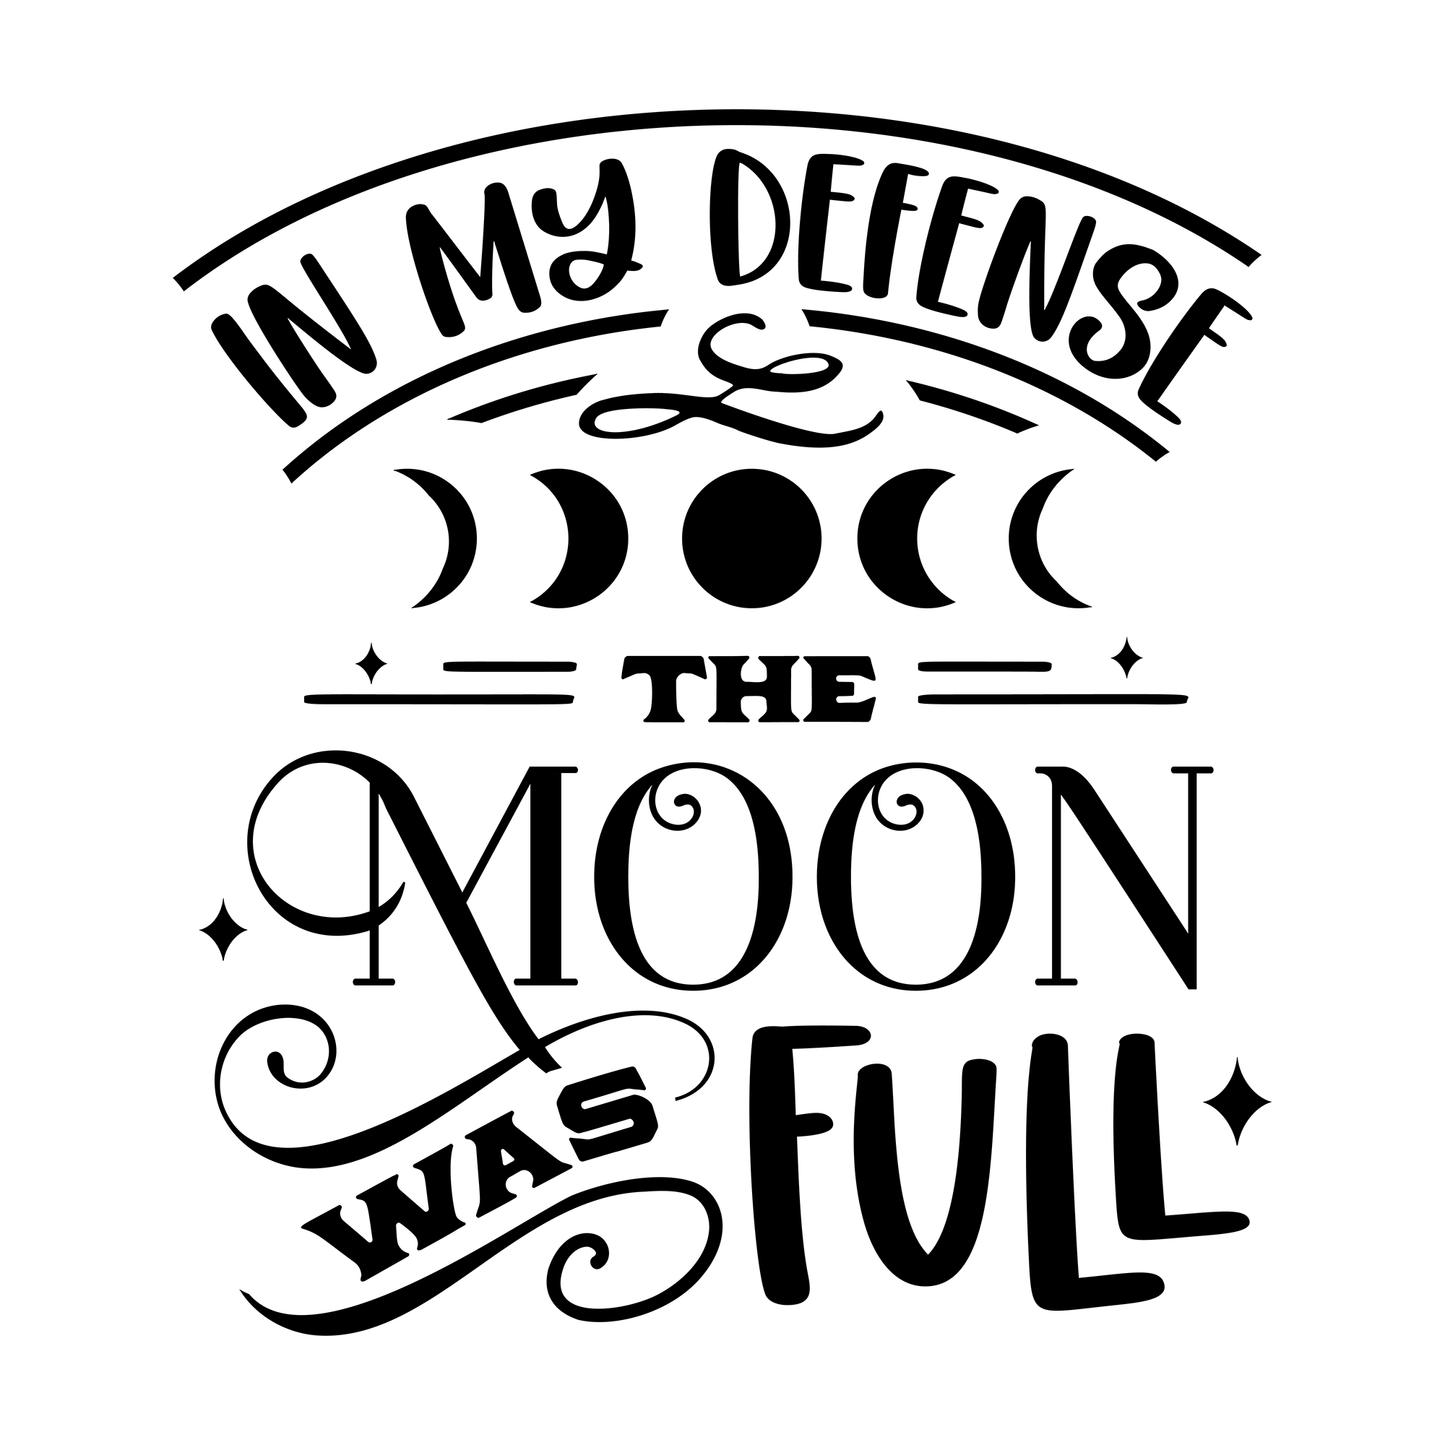 In My Defense The Moon Was Full Vinyl Decal Sticker